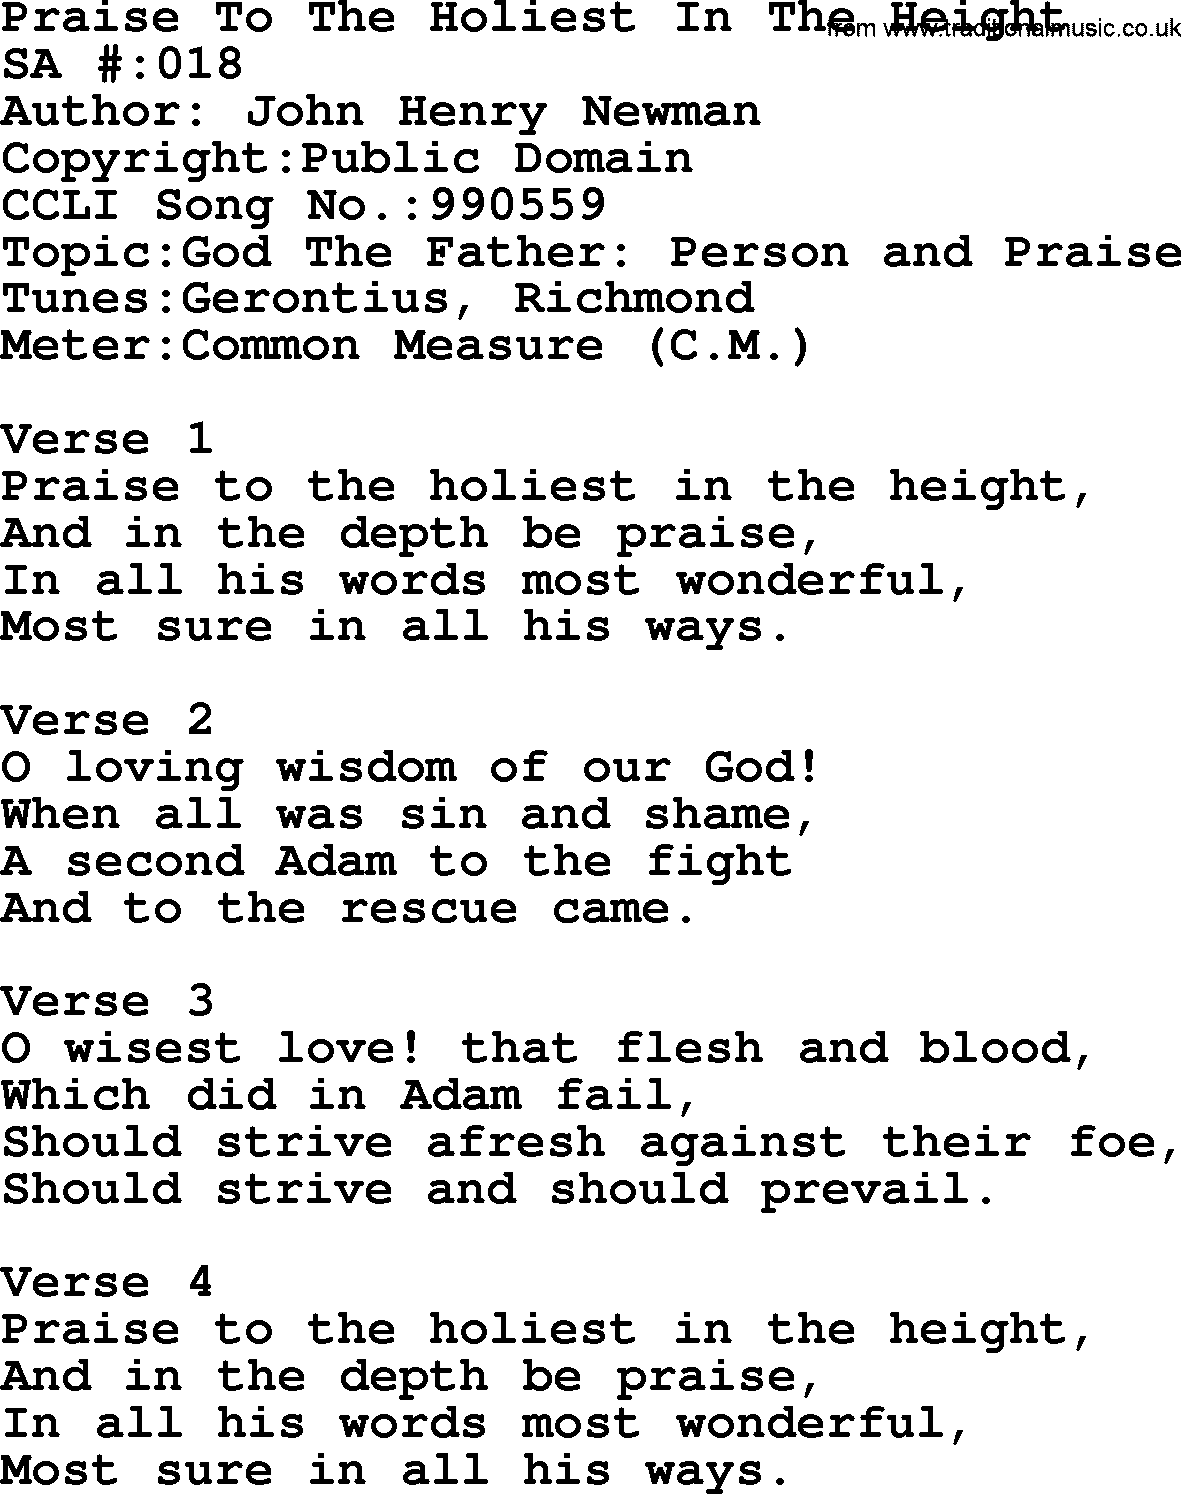 Salvation Army Hymnal, title: Praise To The Holiest In The Height, with lyrics and PDF,